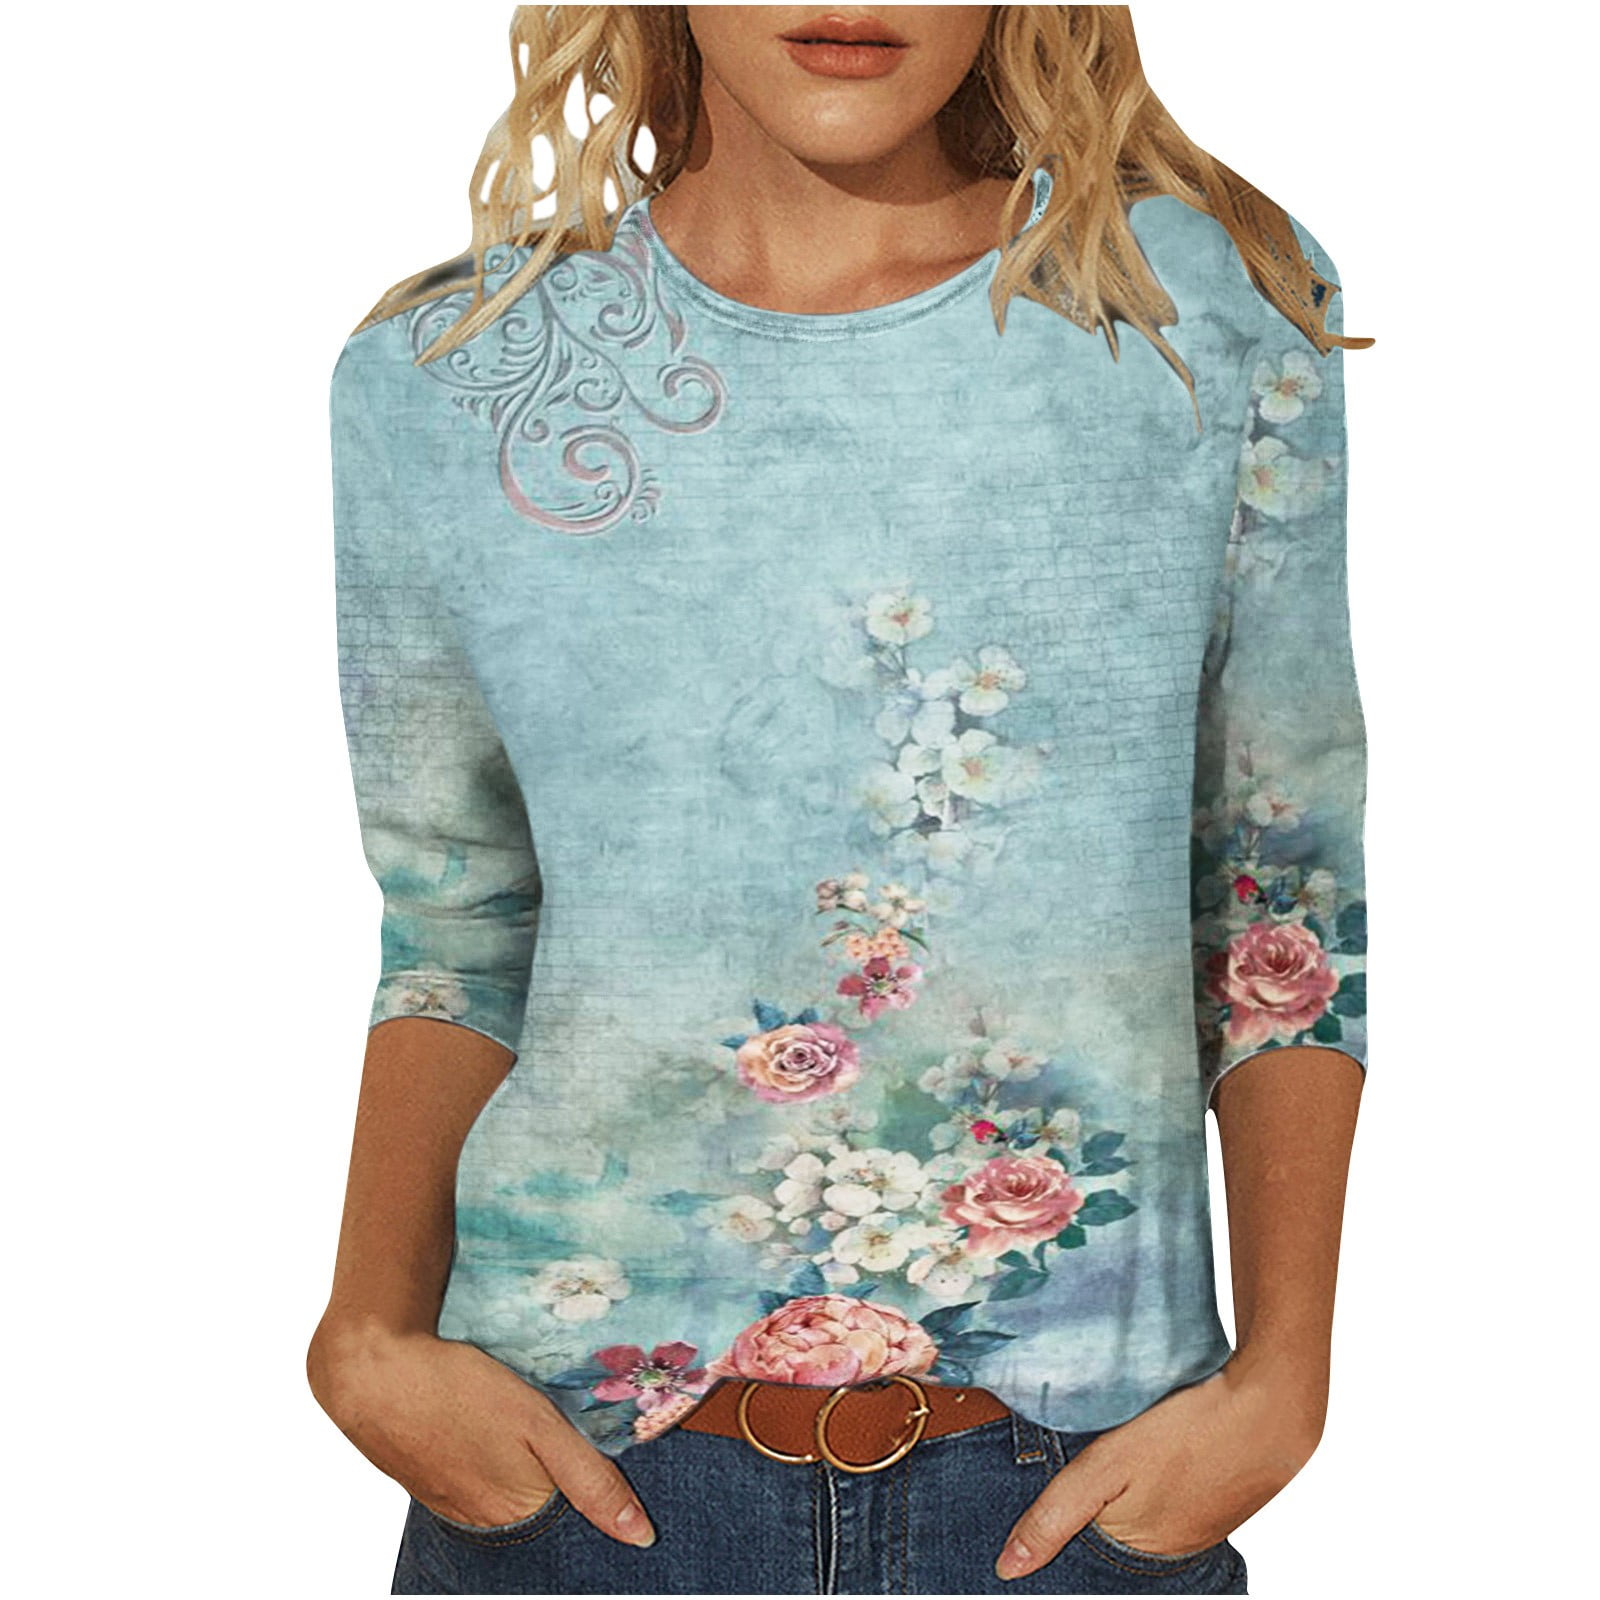 hgsbede 3/4 Sleeve Shirts for Women Fashion Floral Print Mid-Length ...